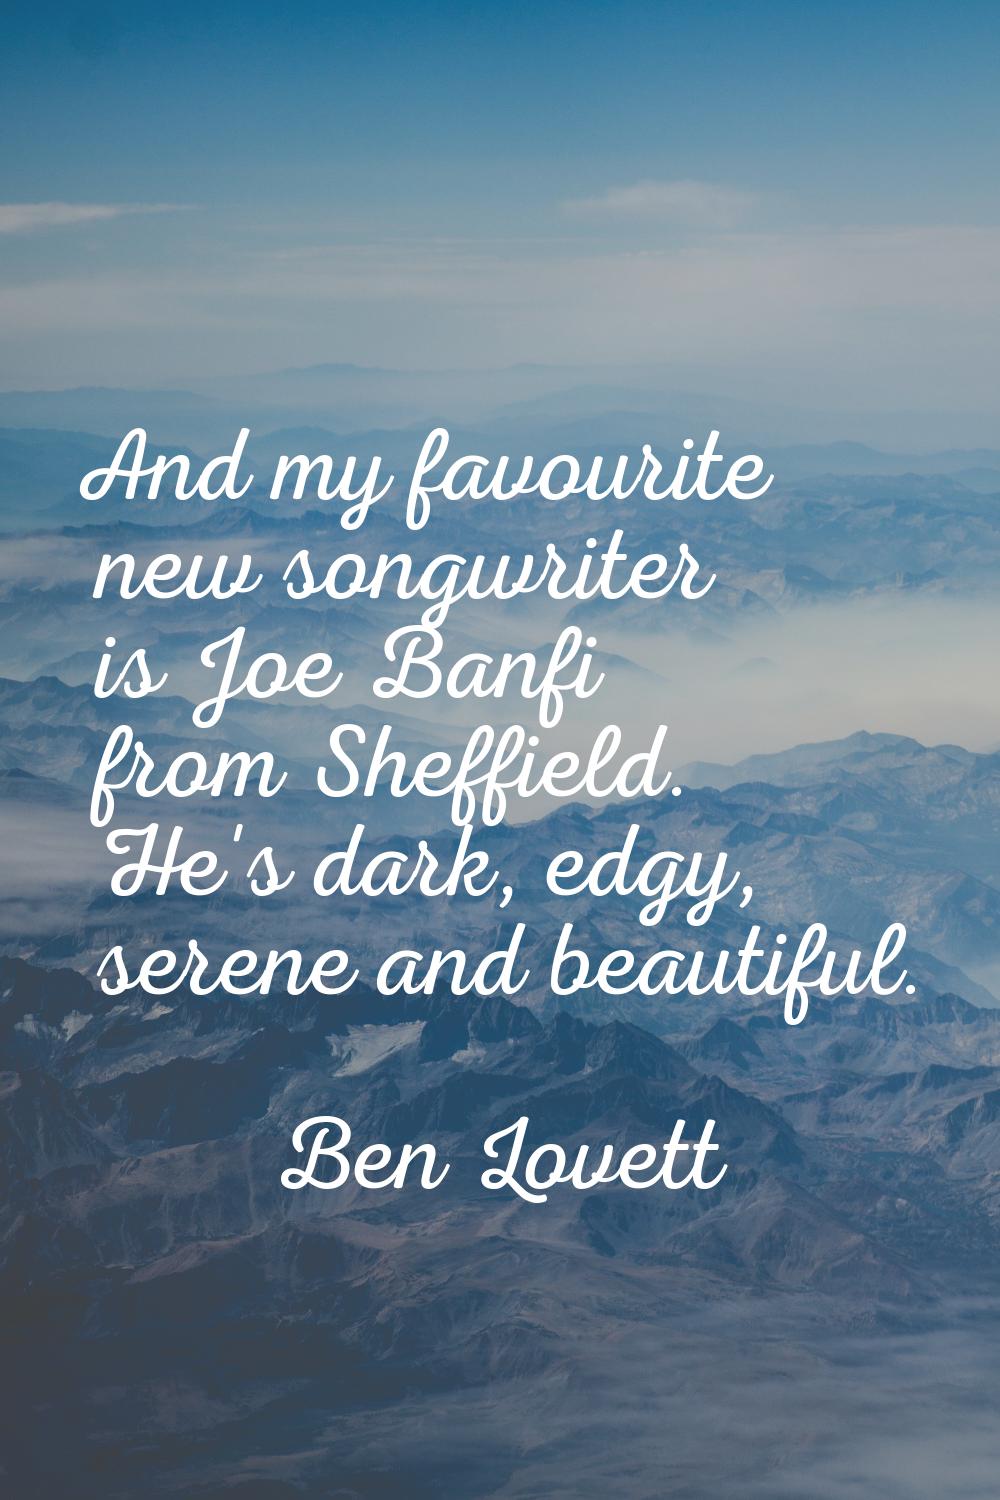 And my favourite new songwriter is Joe Banfi from Sheffield. He's dark, edgy, serene and beautiful.